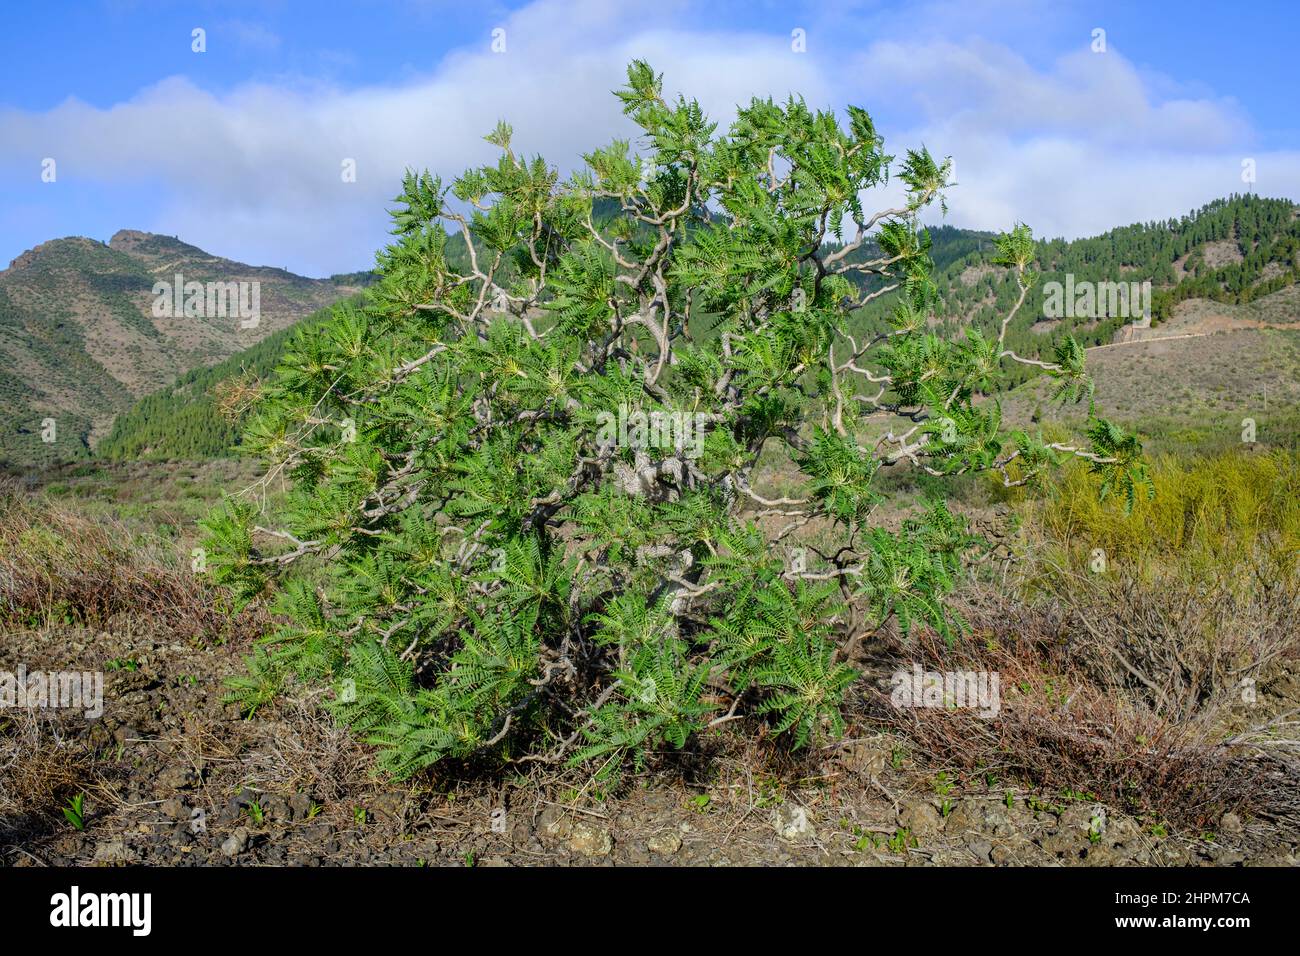 Giant Sonchus canariensis, spring time, Santiago del Teide, Tenerife, Canary Islands, Spain Stock Photo